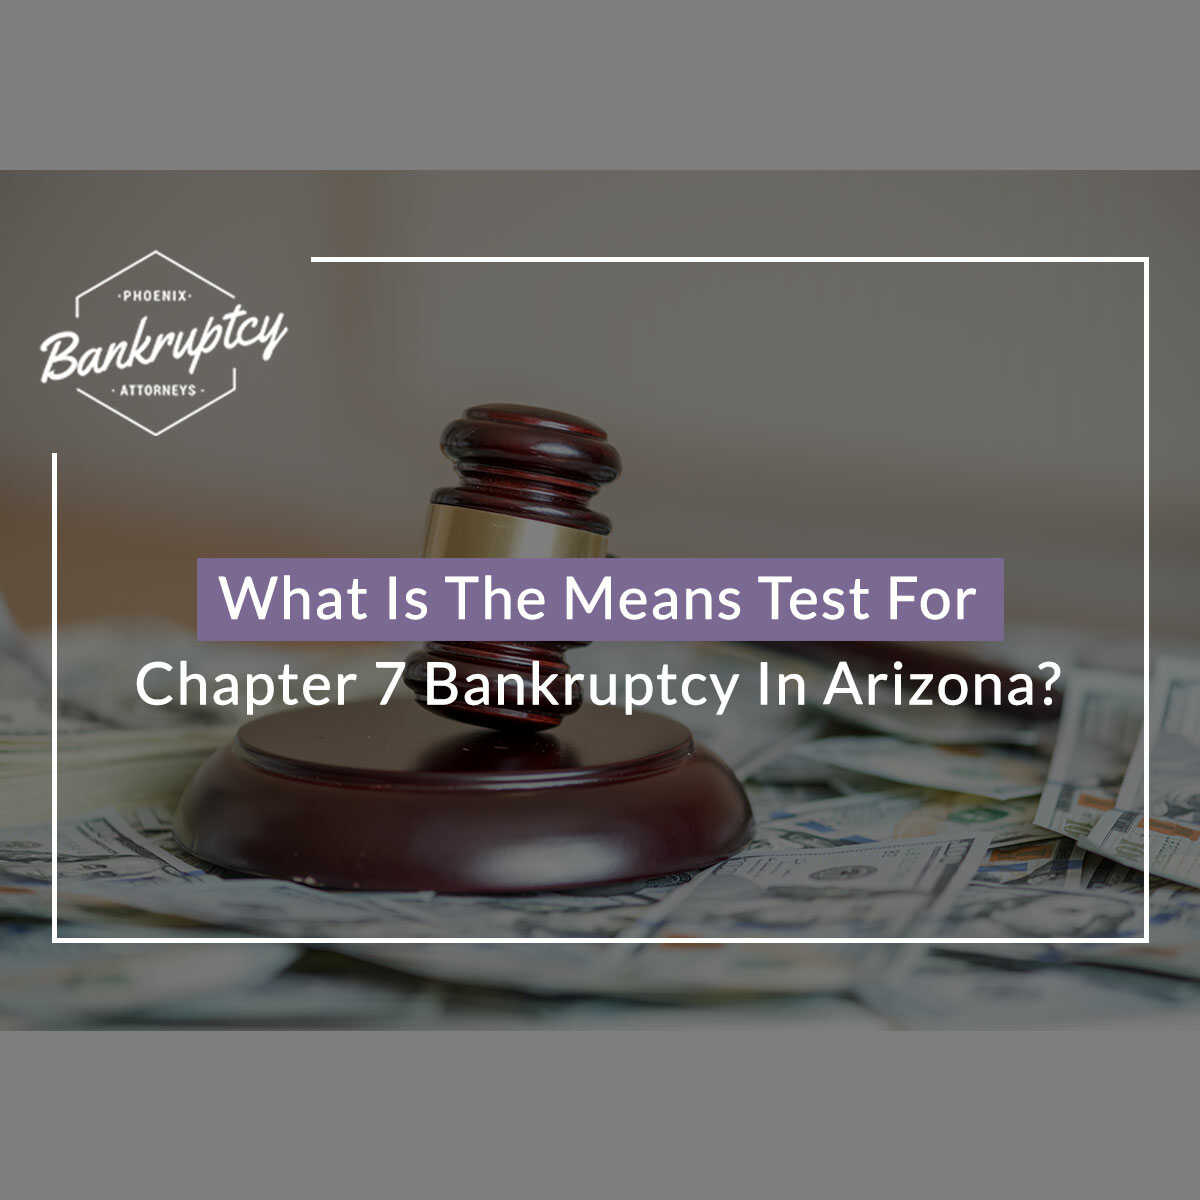 What Is The Means Test For Chapter 7 Bankruptcy In Arizona?